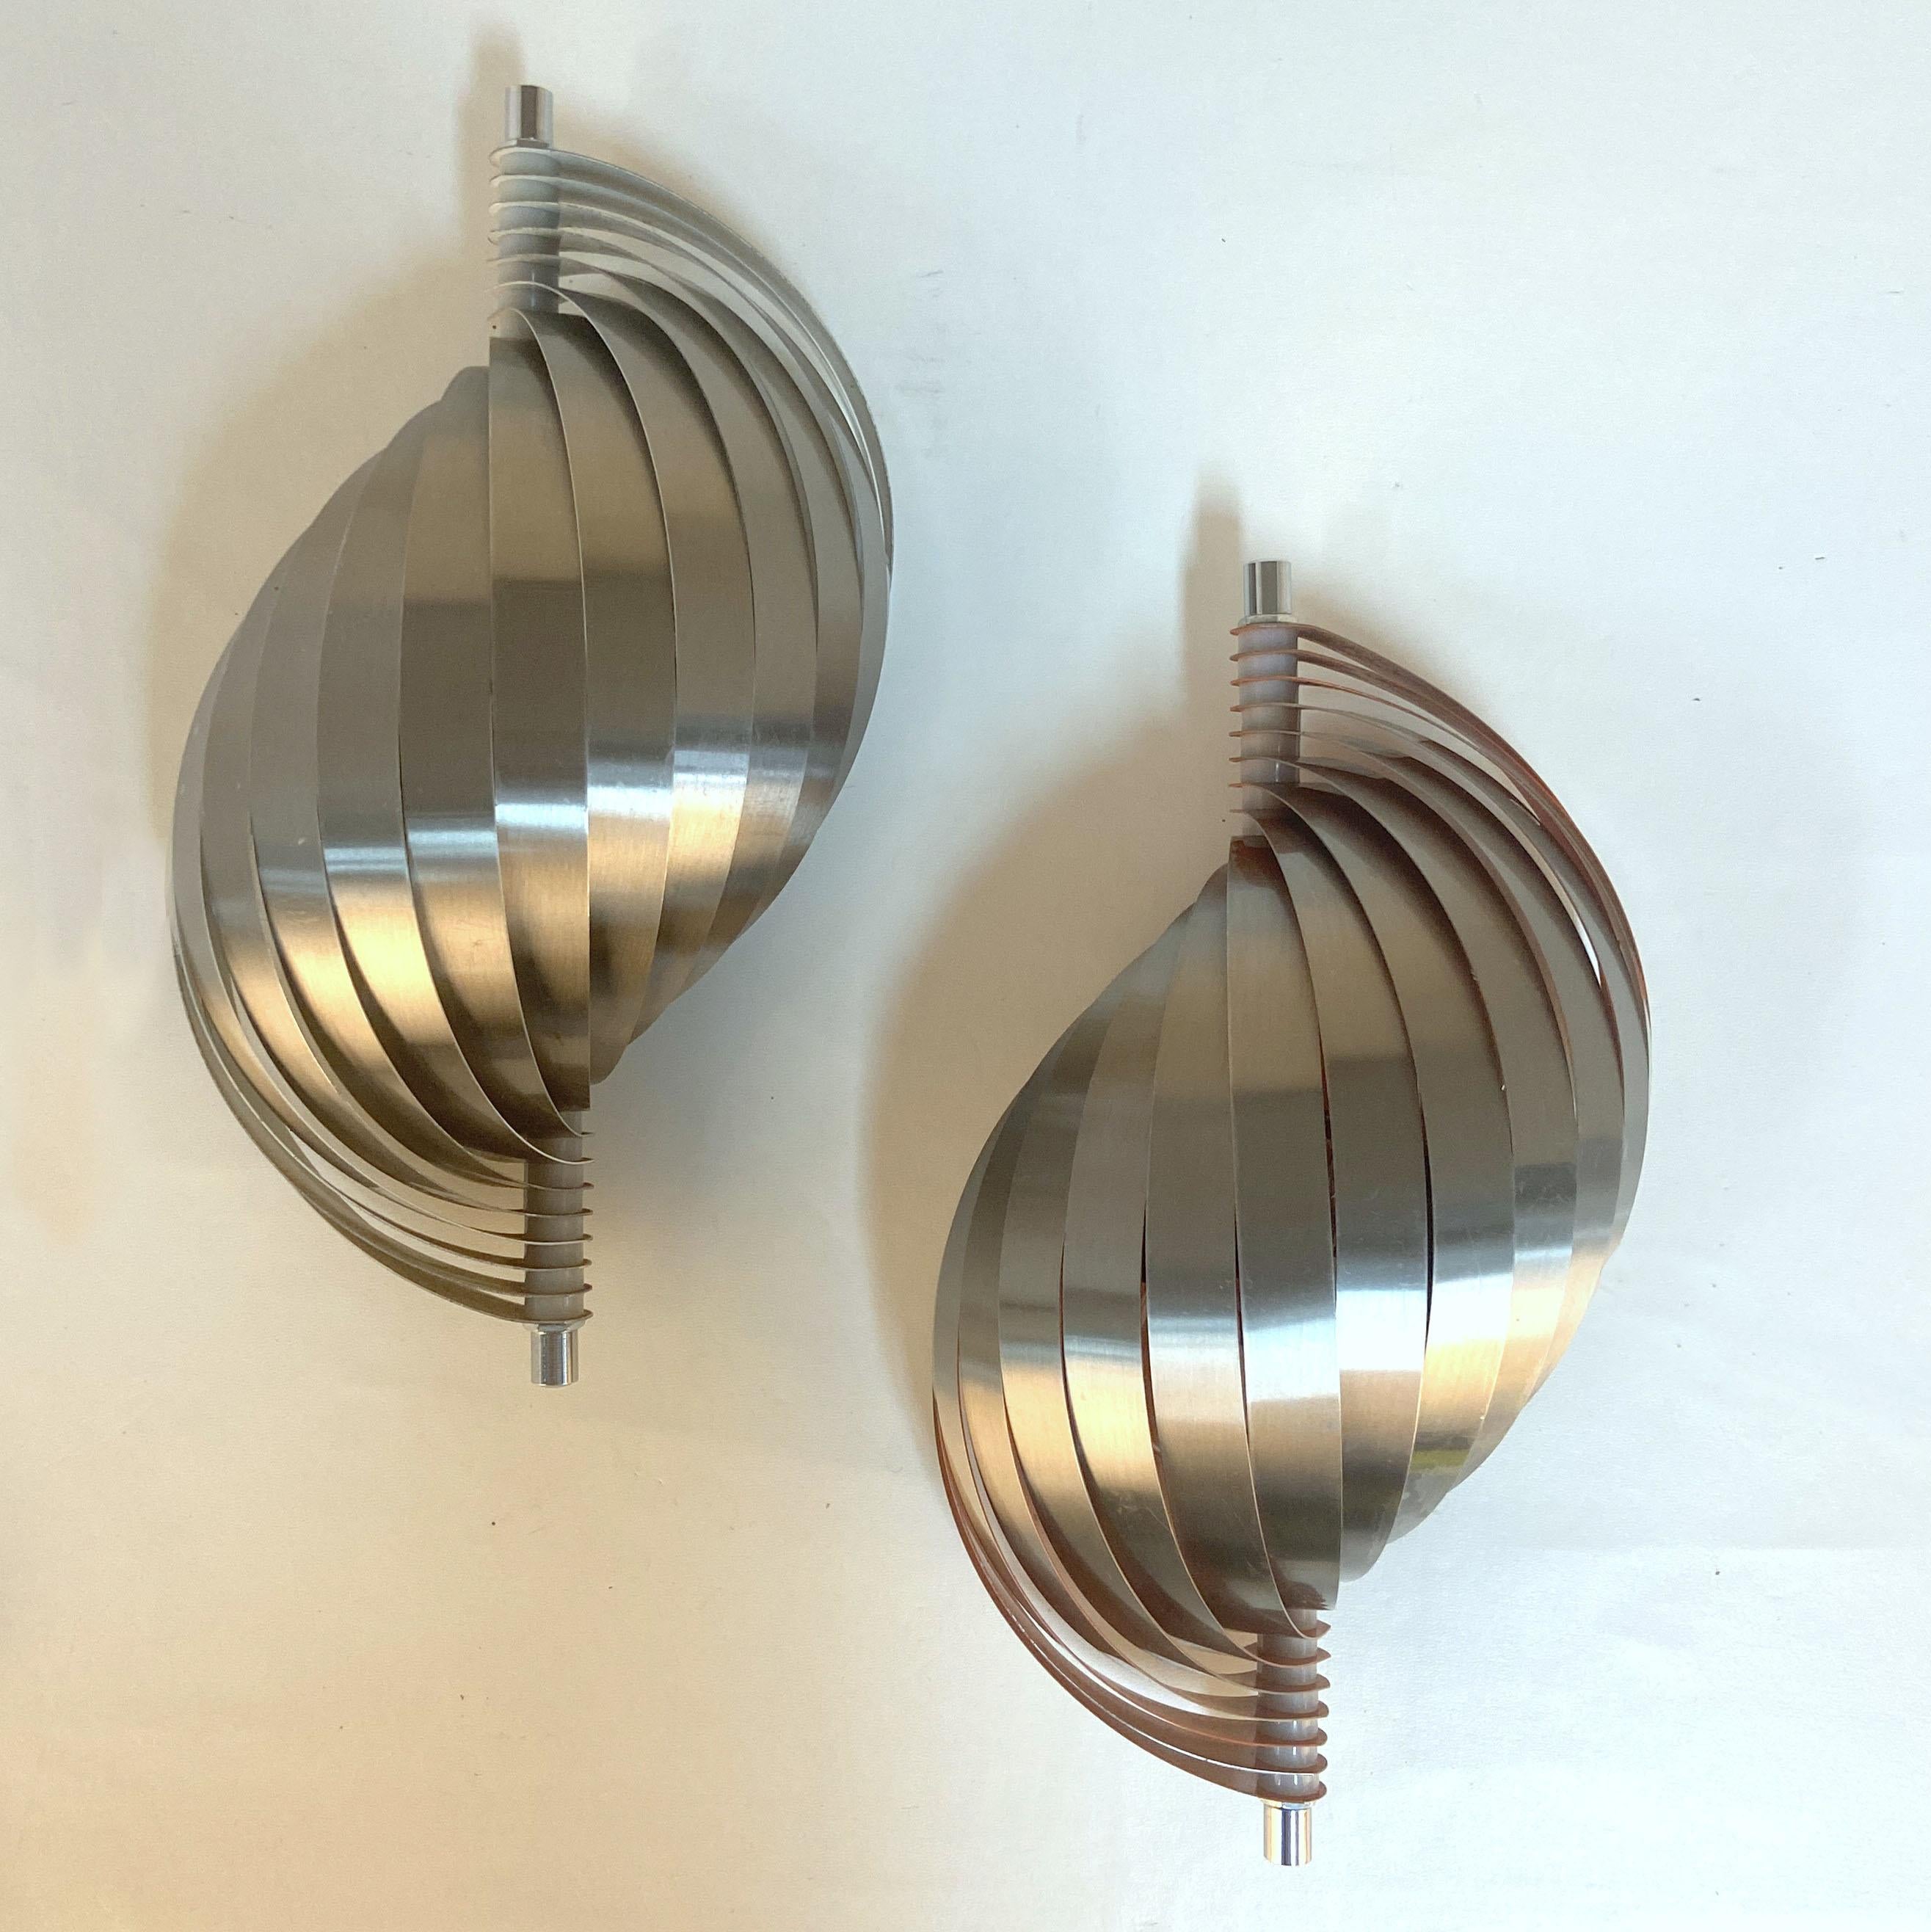 Spiral wall sconces in the style of Henri Mathieu were manufactured by The Massive Lighting Company in Wilrijk, Belgium 1970's.
One of these lights has a warm orange color inside and the other is white inside which influences the color of the light